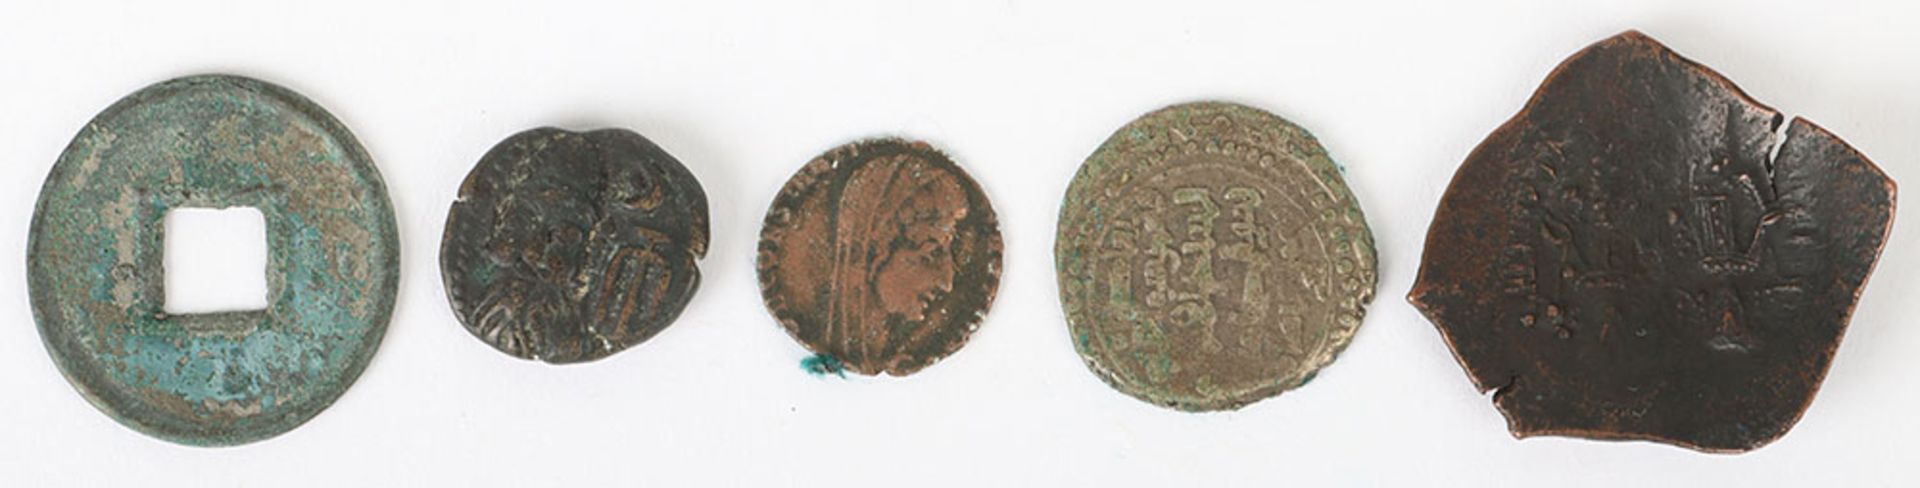 A Byzantine ‘cup’ coin,